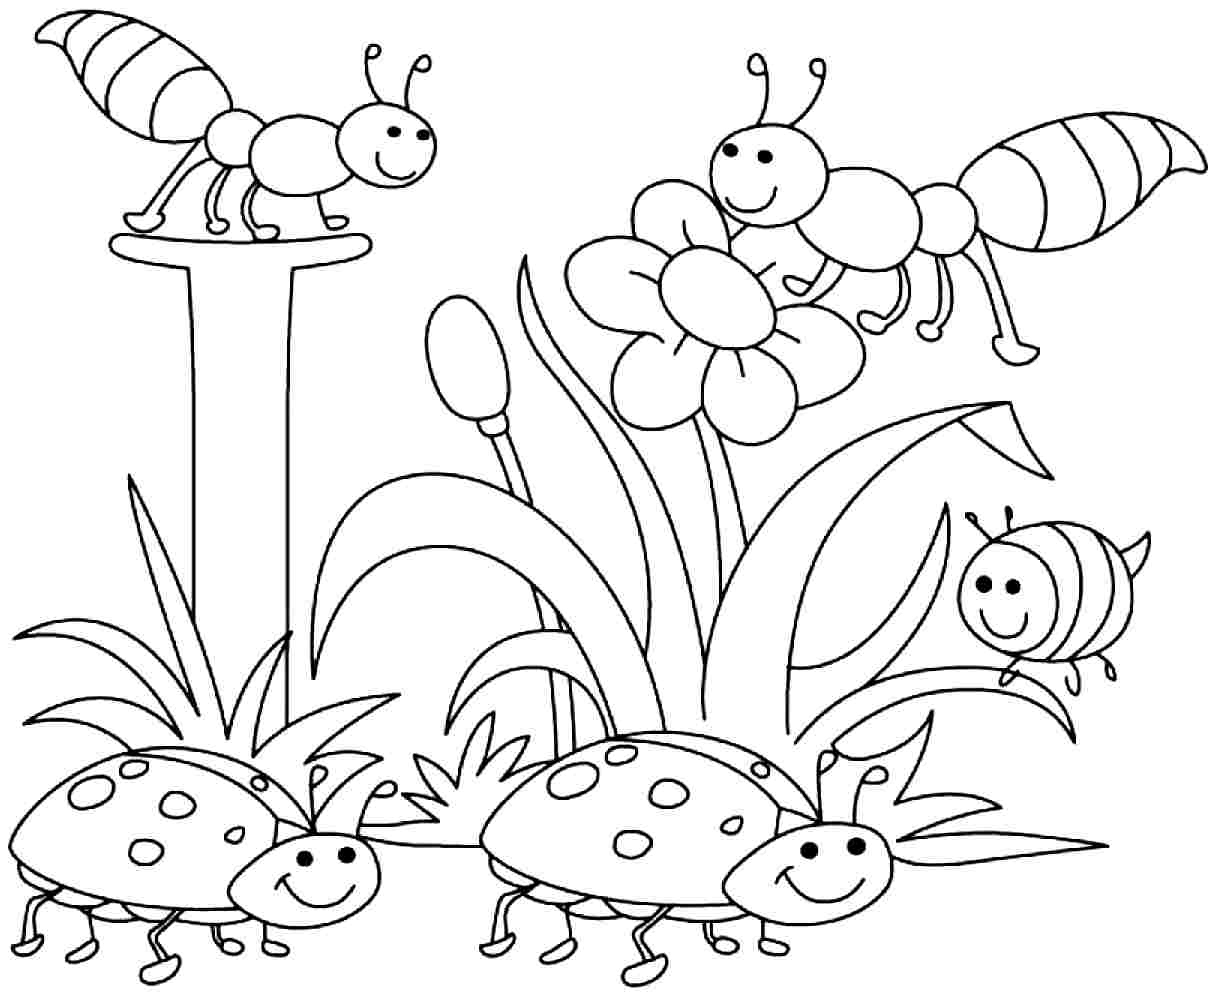 Free Printable Coloring Pages for Kindergarten: 37 Coloring Sheets ...